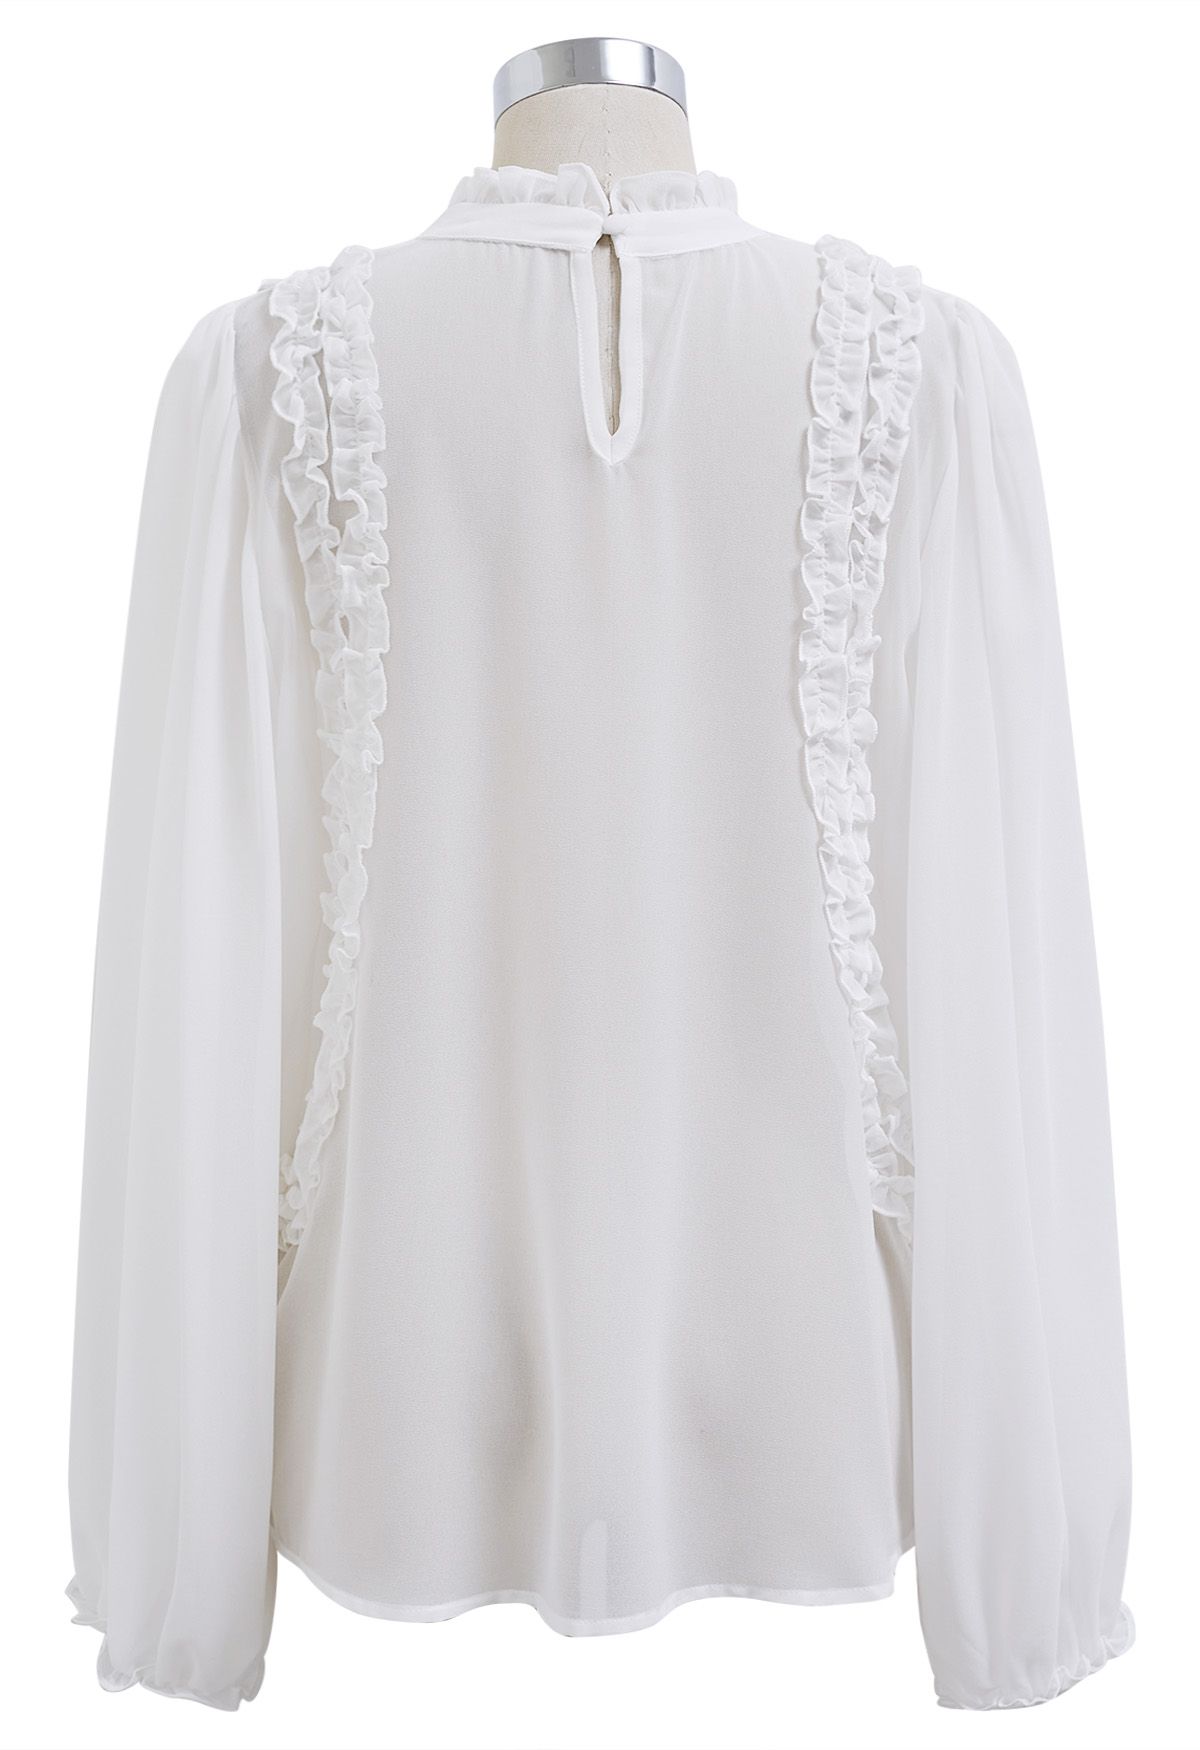 Ruffle Adorned Bubble Sleeves Chiffon Top in White